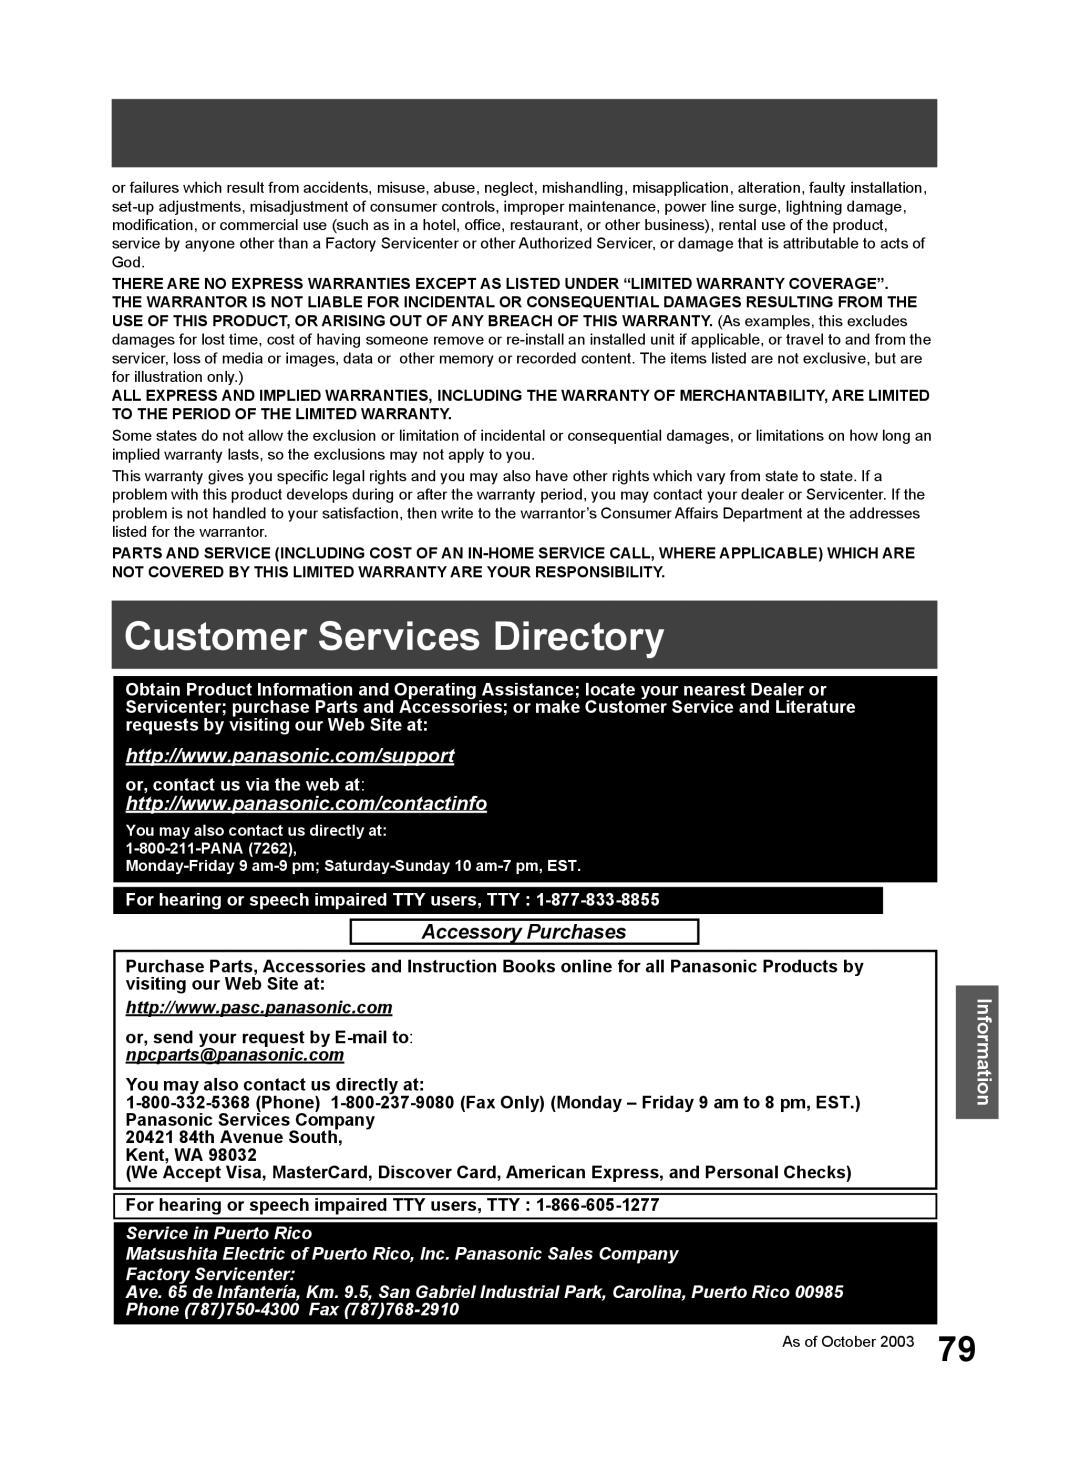 Panasonic PV DF2704 manual Customer Services Directory, Accessory Purchases, Information, or, contact us via the web at 